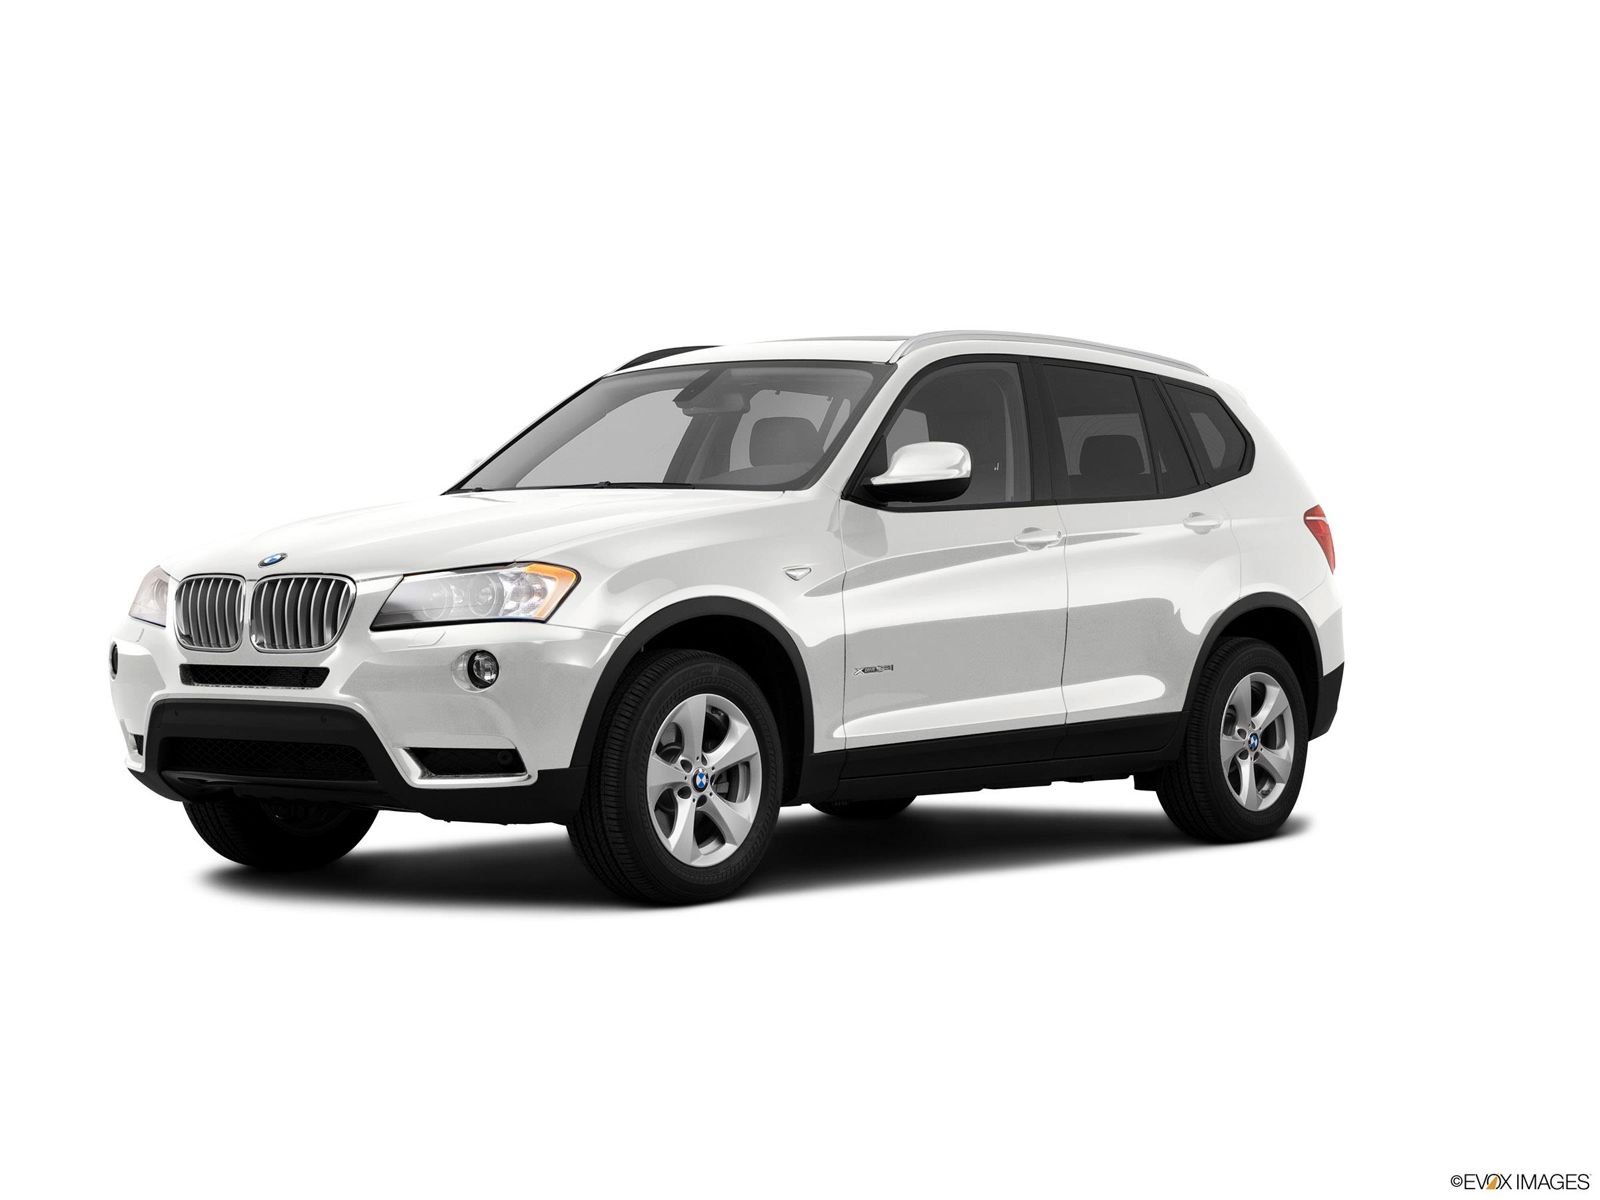 2011 BMW X3 Research, Photos, Specs and Expertise | CarMax